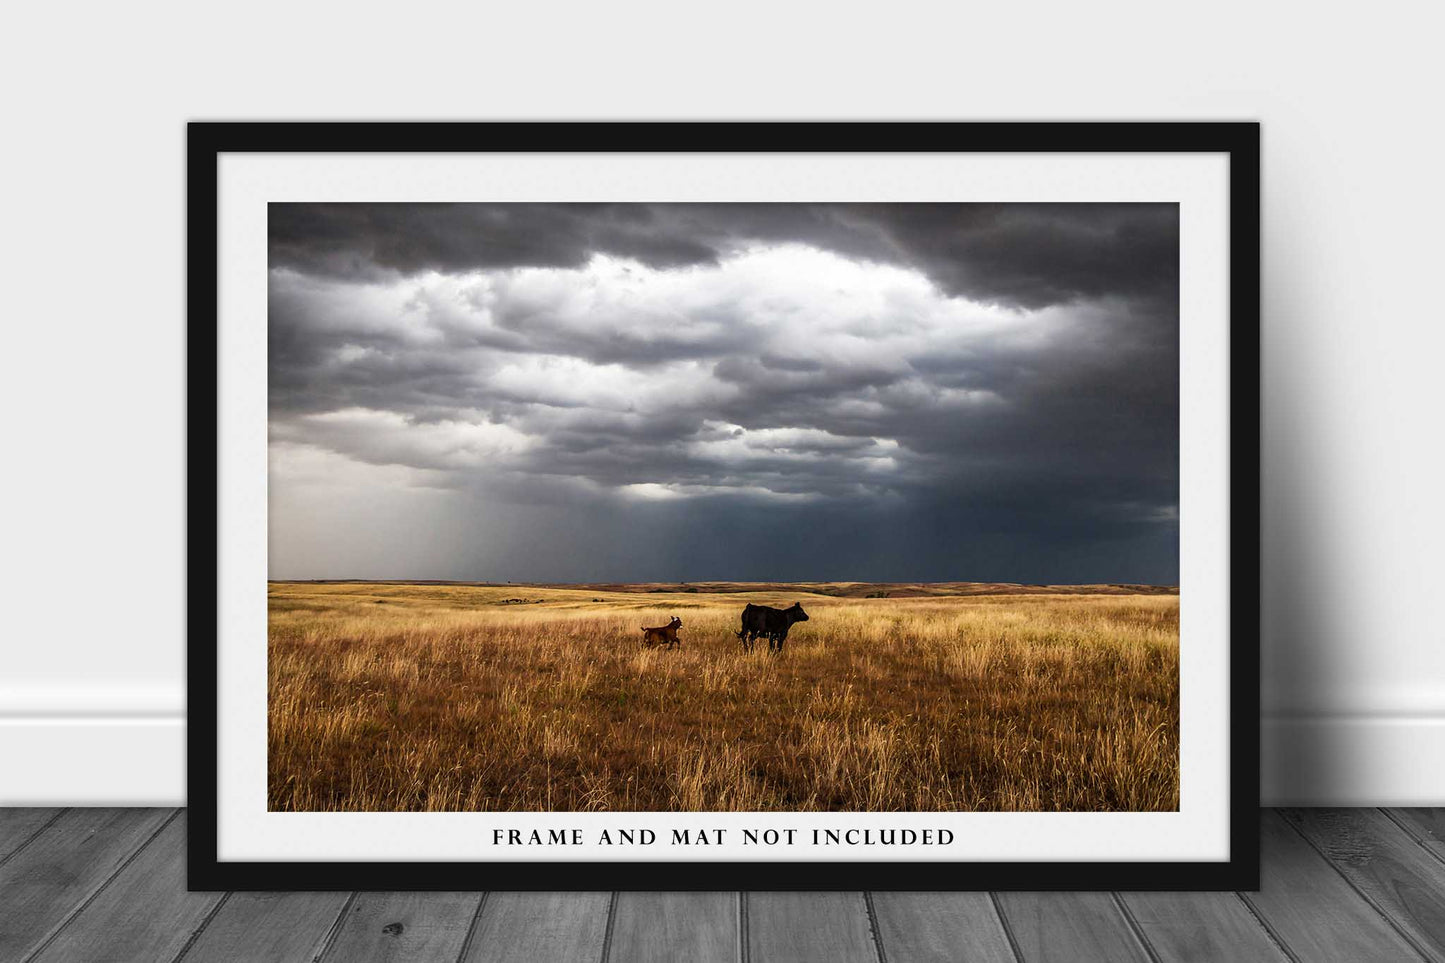 Cow and Calf Photography Print | Cattle Picture | Great Plains Wall Art | Oklahoma Photo | Western Decor | Not Framed